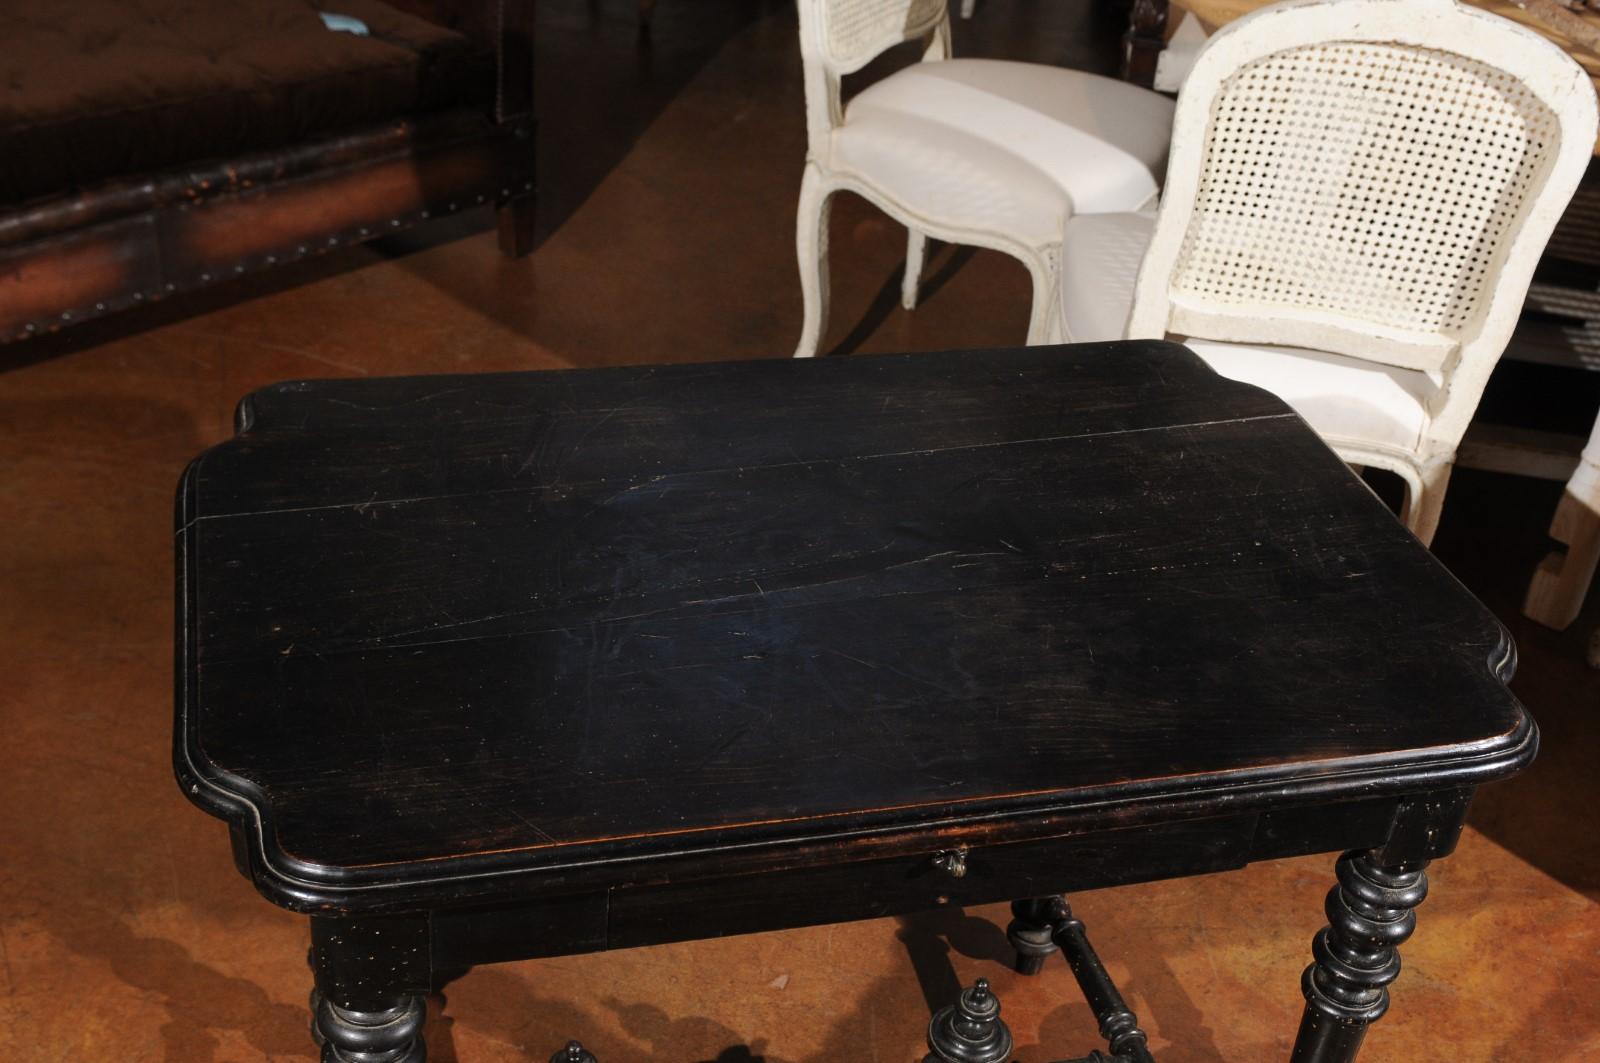 A petite French Louis XIII style ebonized wood side table from the 19th century, with single drawer, turned legs and cross stretcher. Born in France during the 19th century, this charming side table or desk features a rectangular top with curving